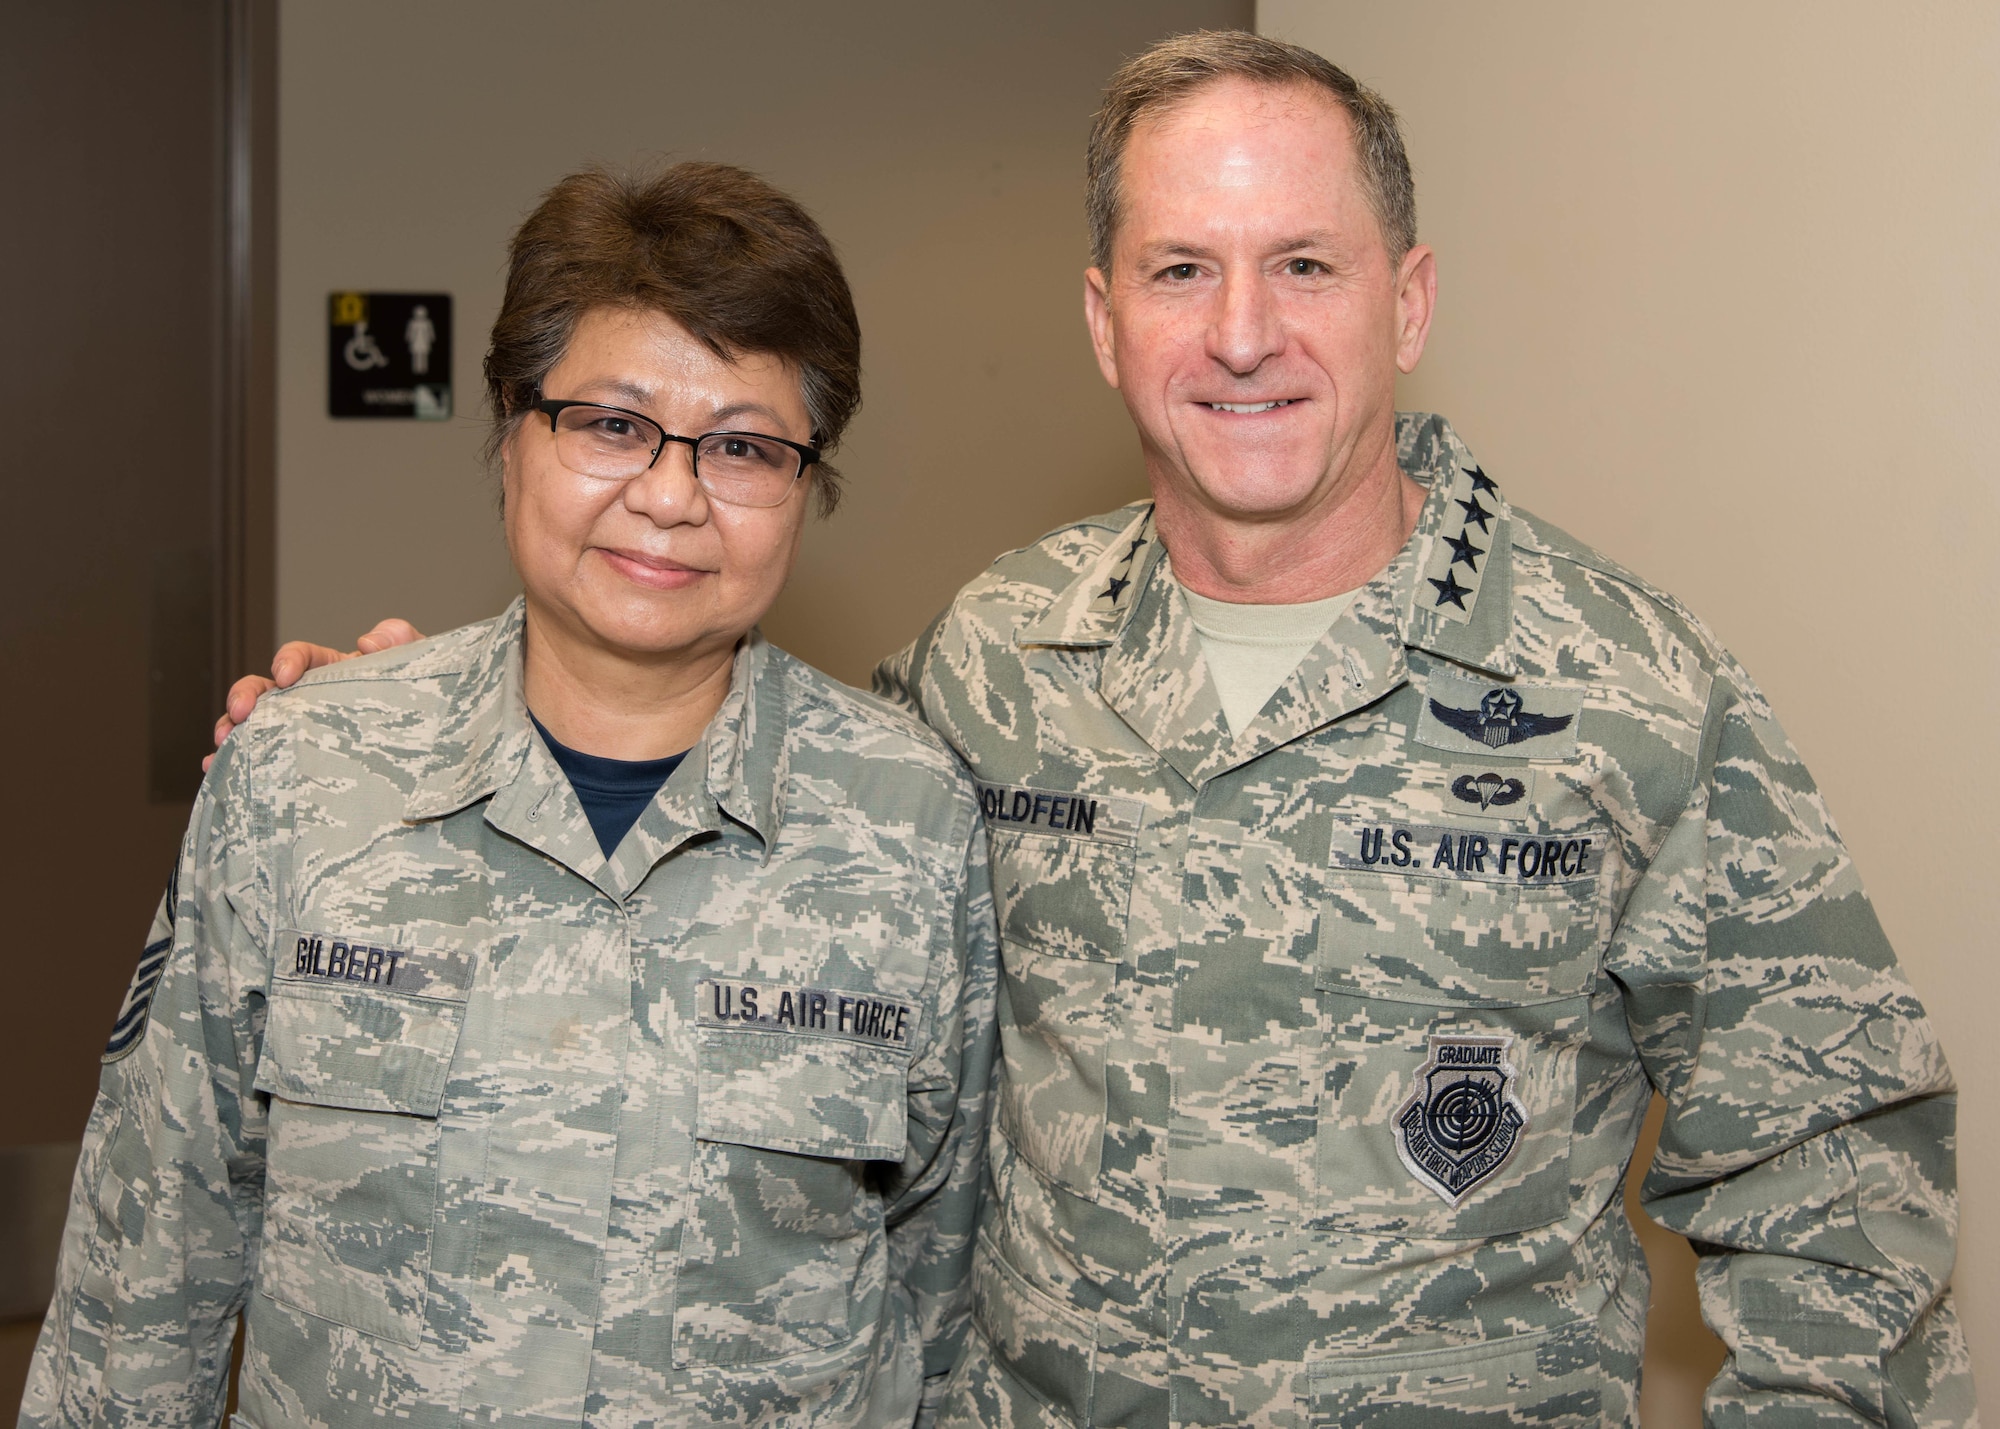 Air Force Chief of Staff Gen. David L. Goldfein and Senior Master Sgt. Elizabeth Gilbert, 136th Airlift Wing Public Affairs superintendent, Texas Air National Guard, pose for a photo during his visit to Naval Air Station Fort Worth Joint Reserve Base, Texas, Jan. 29, 2017. Gilbert was coined for her 40 years of service in the Air Force and lifetime achievement award in public affairs. (Air National Guard photo by Senior Airman De'Jon Williams)